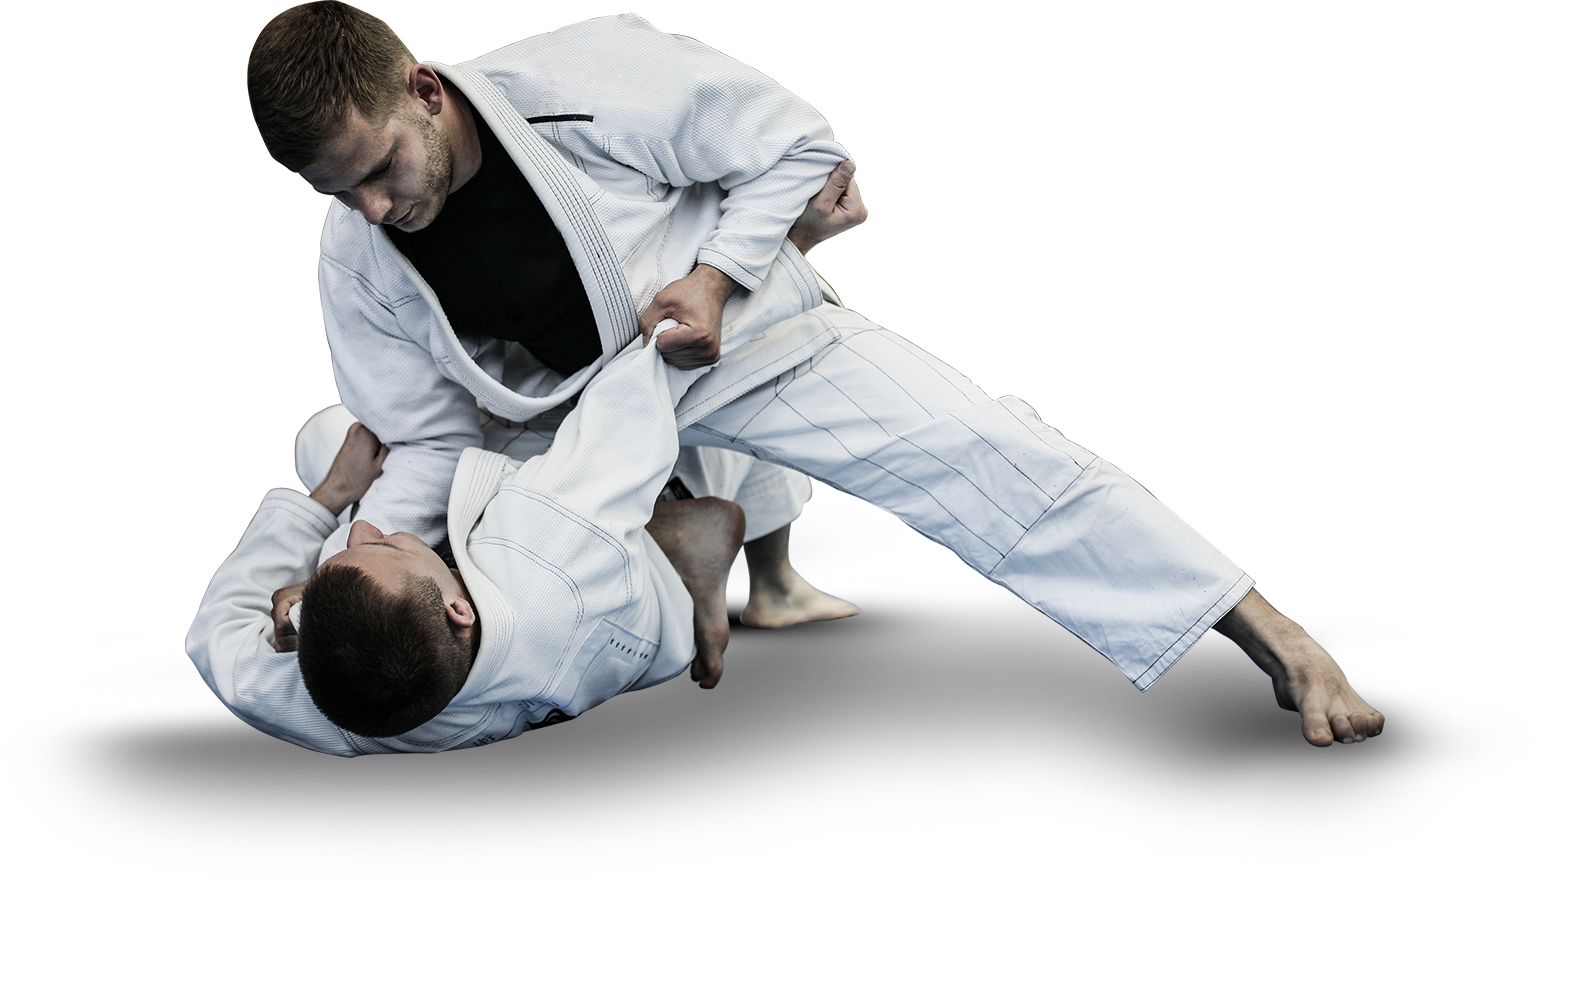 Two men are fighting each other in a karate match.